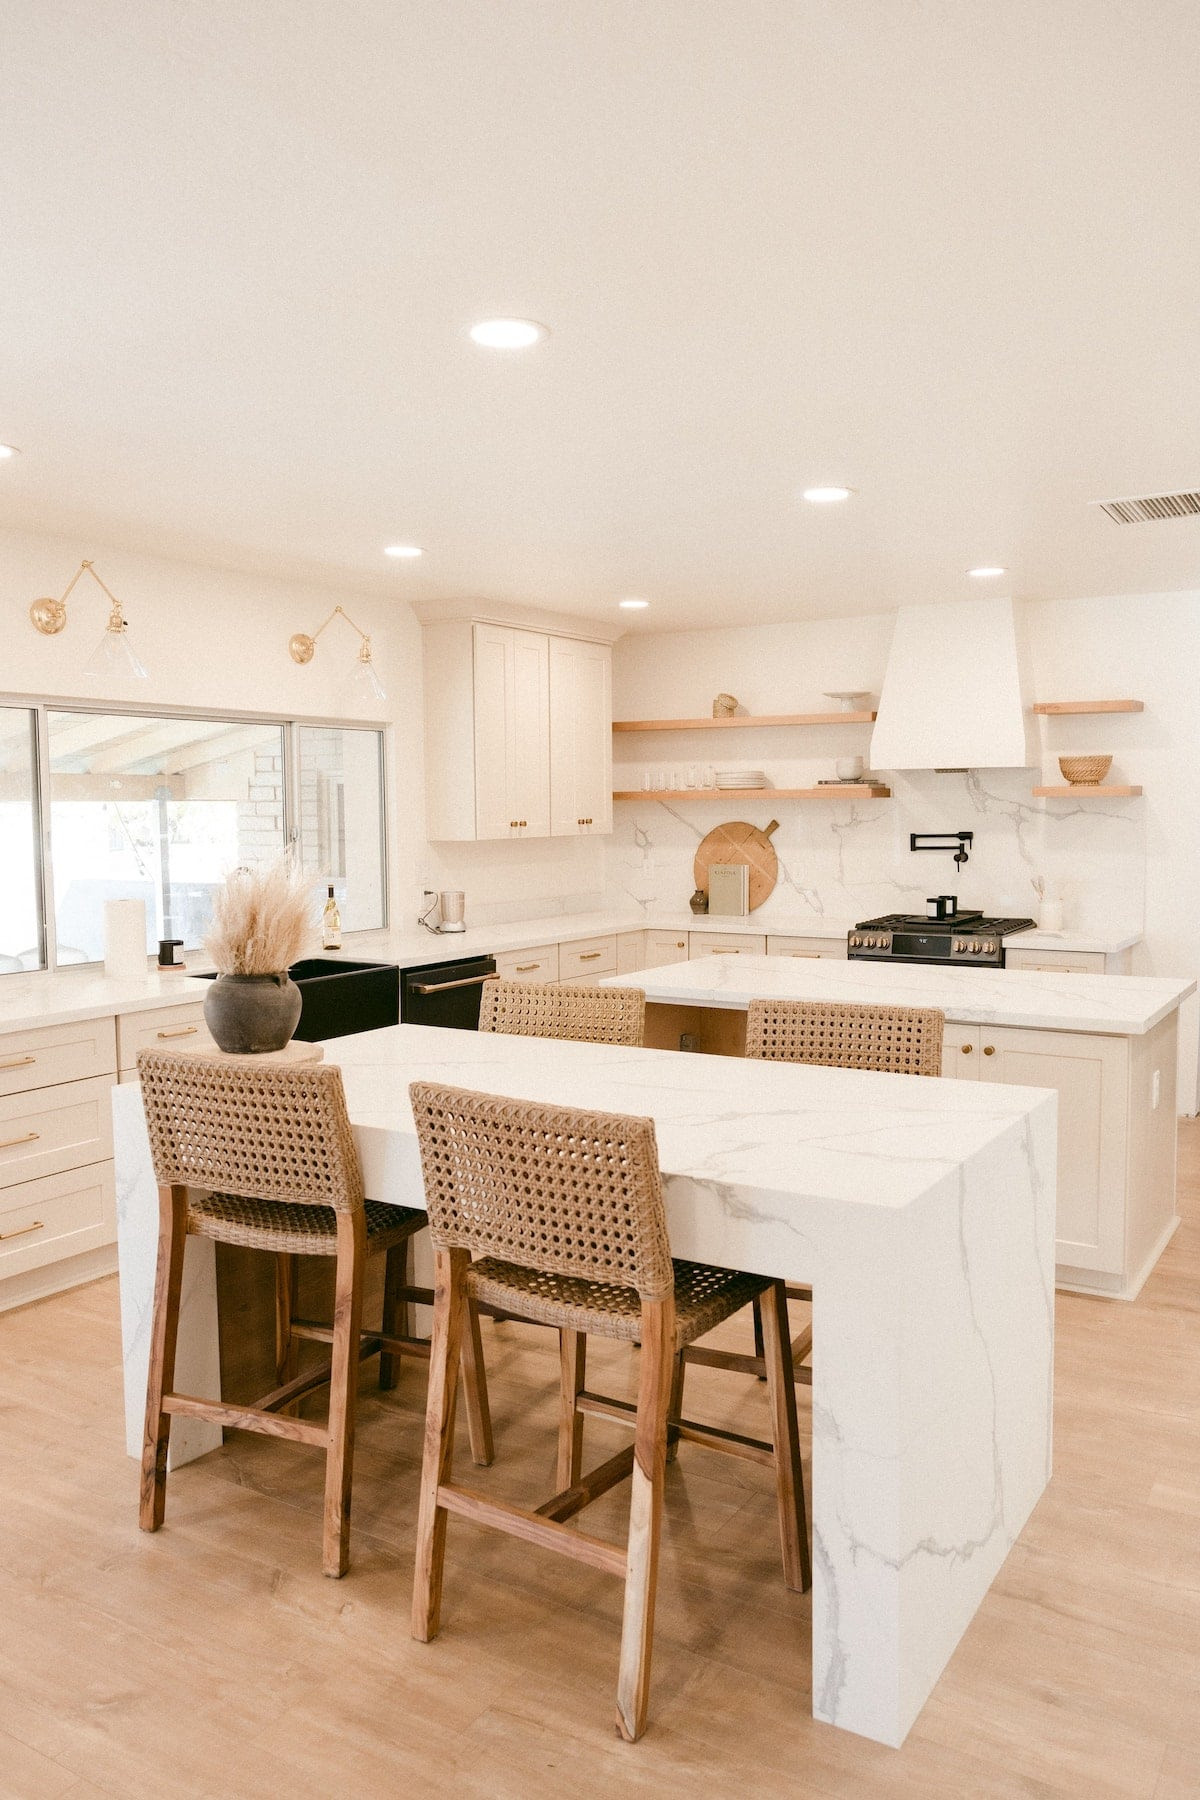 Kitchen Lighting Ideas - How To Plan For Your Needs - shabbyfufu